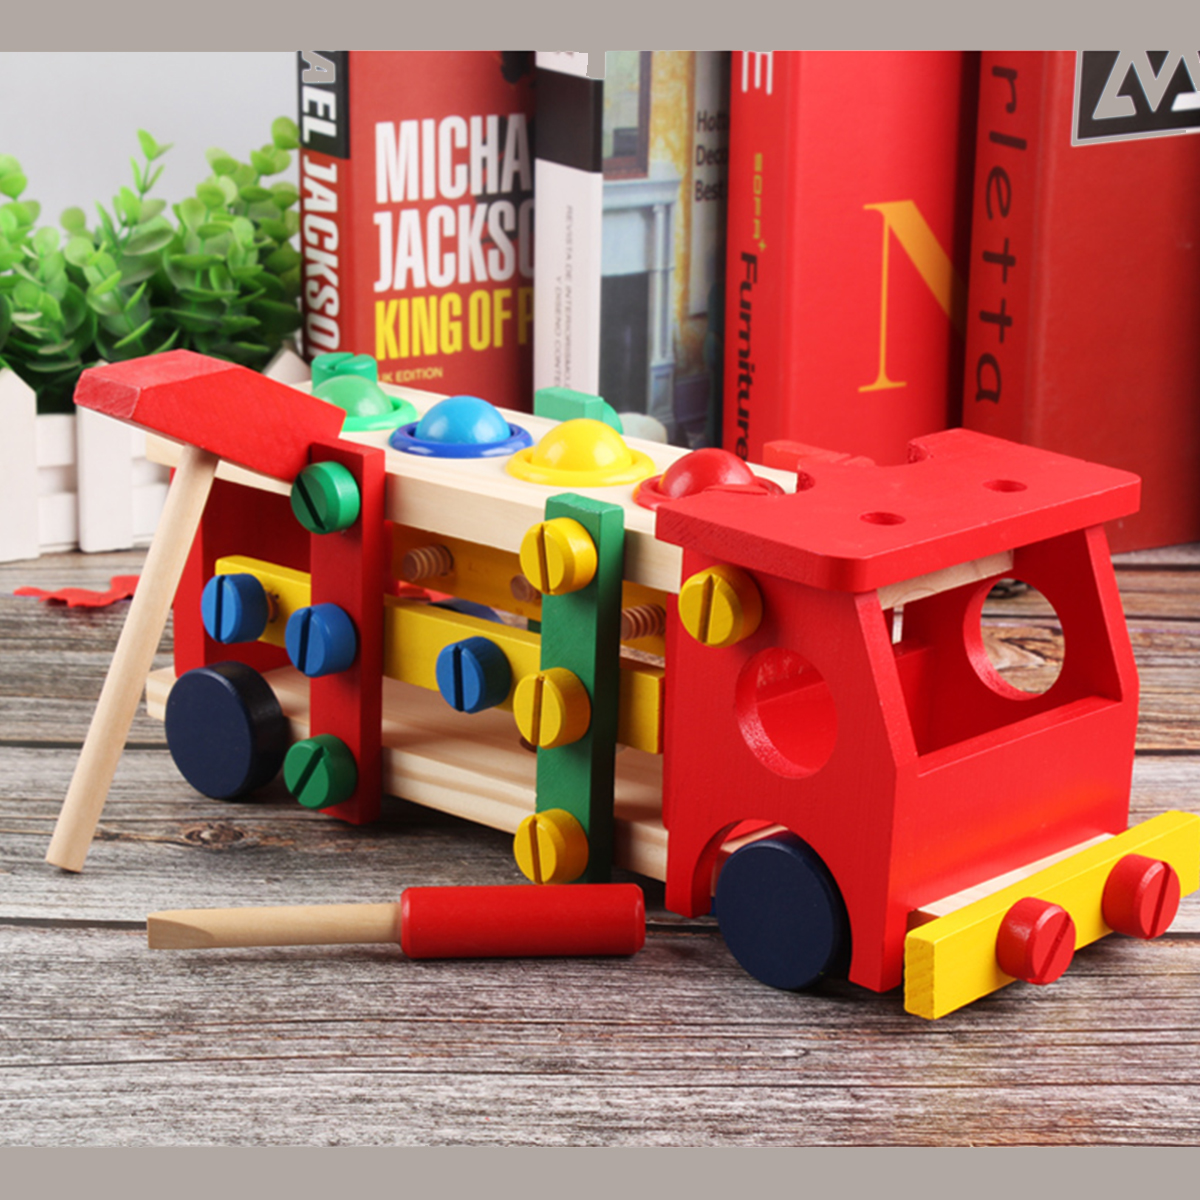 DIY-Educational-Toys-Kids-Exercise-Practical-Wooden-IQ-Game-Car-Assemble-Building-Gift-Training-Brai-1598139-8